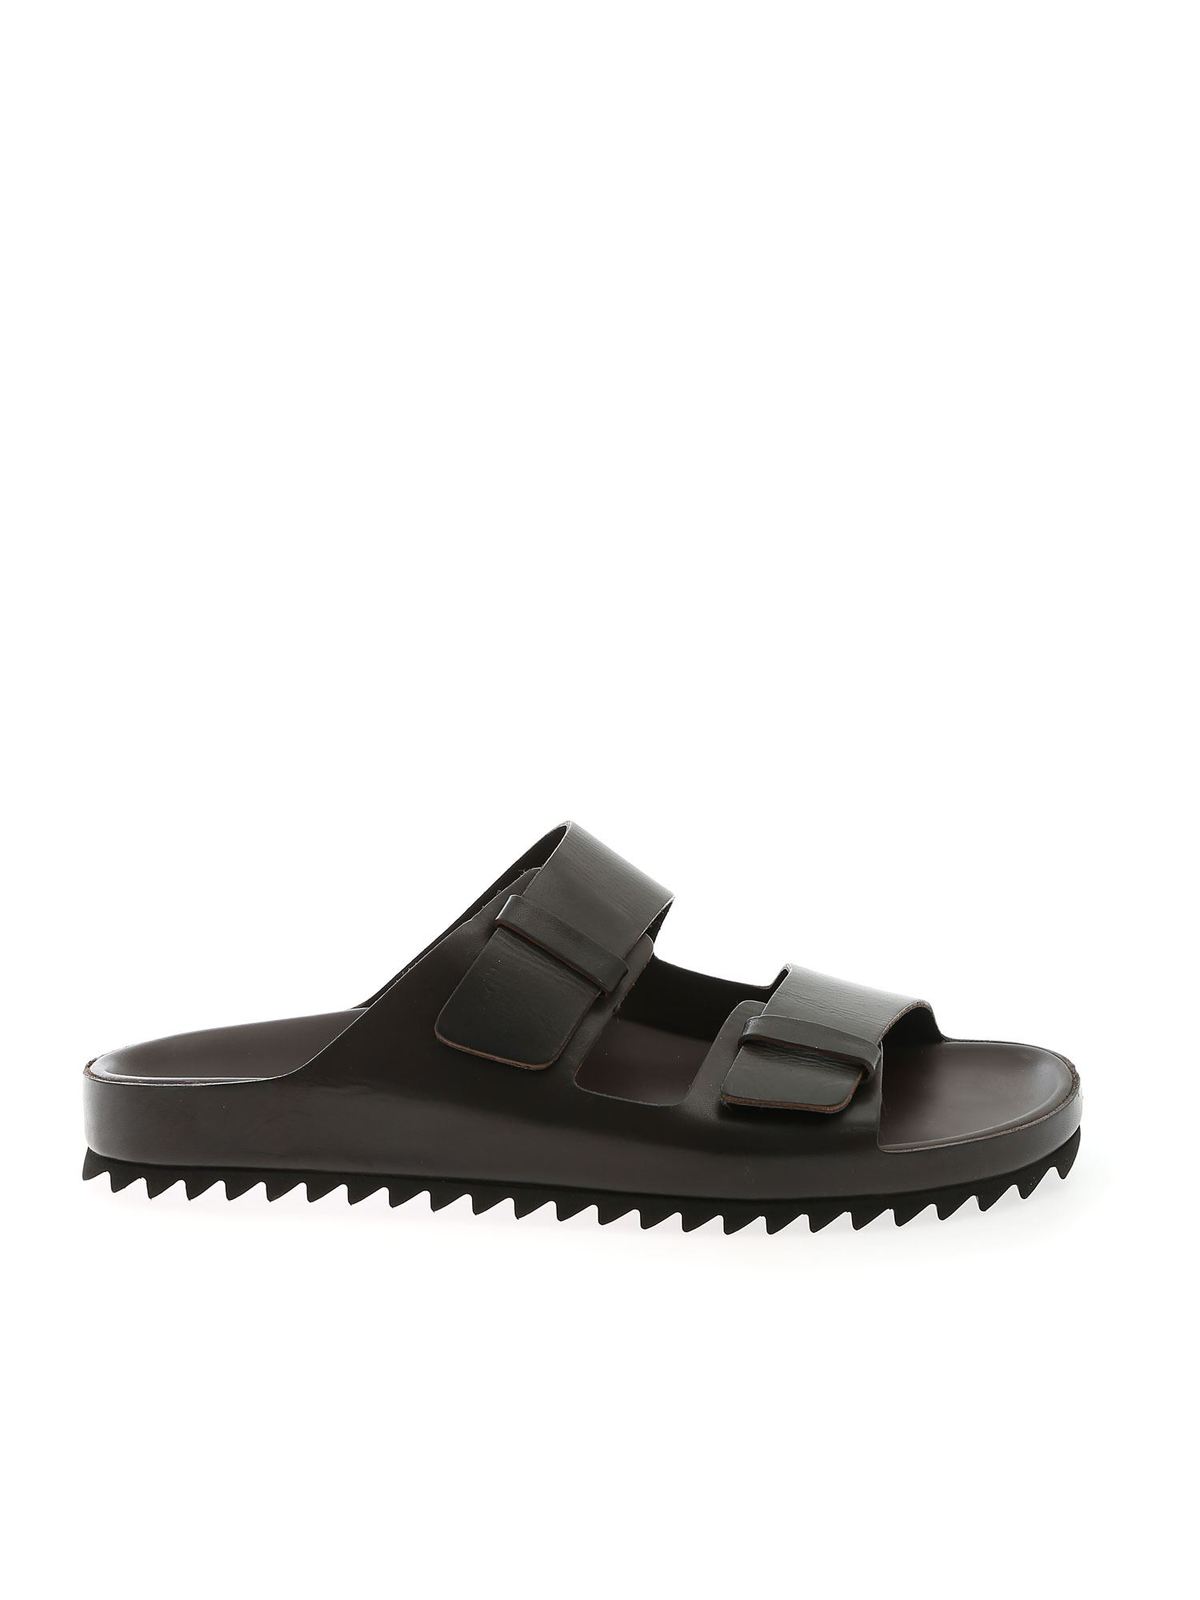 Buy > two band sandals > in stock